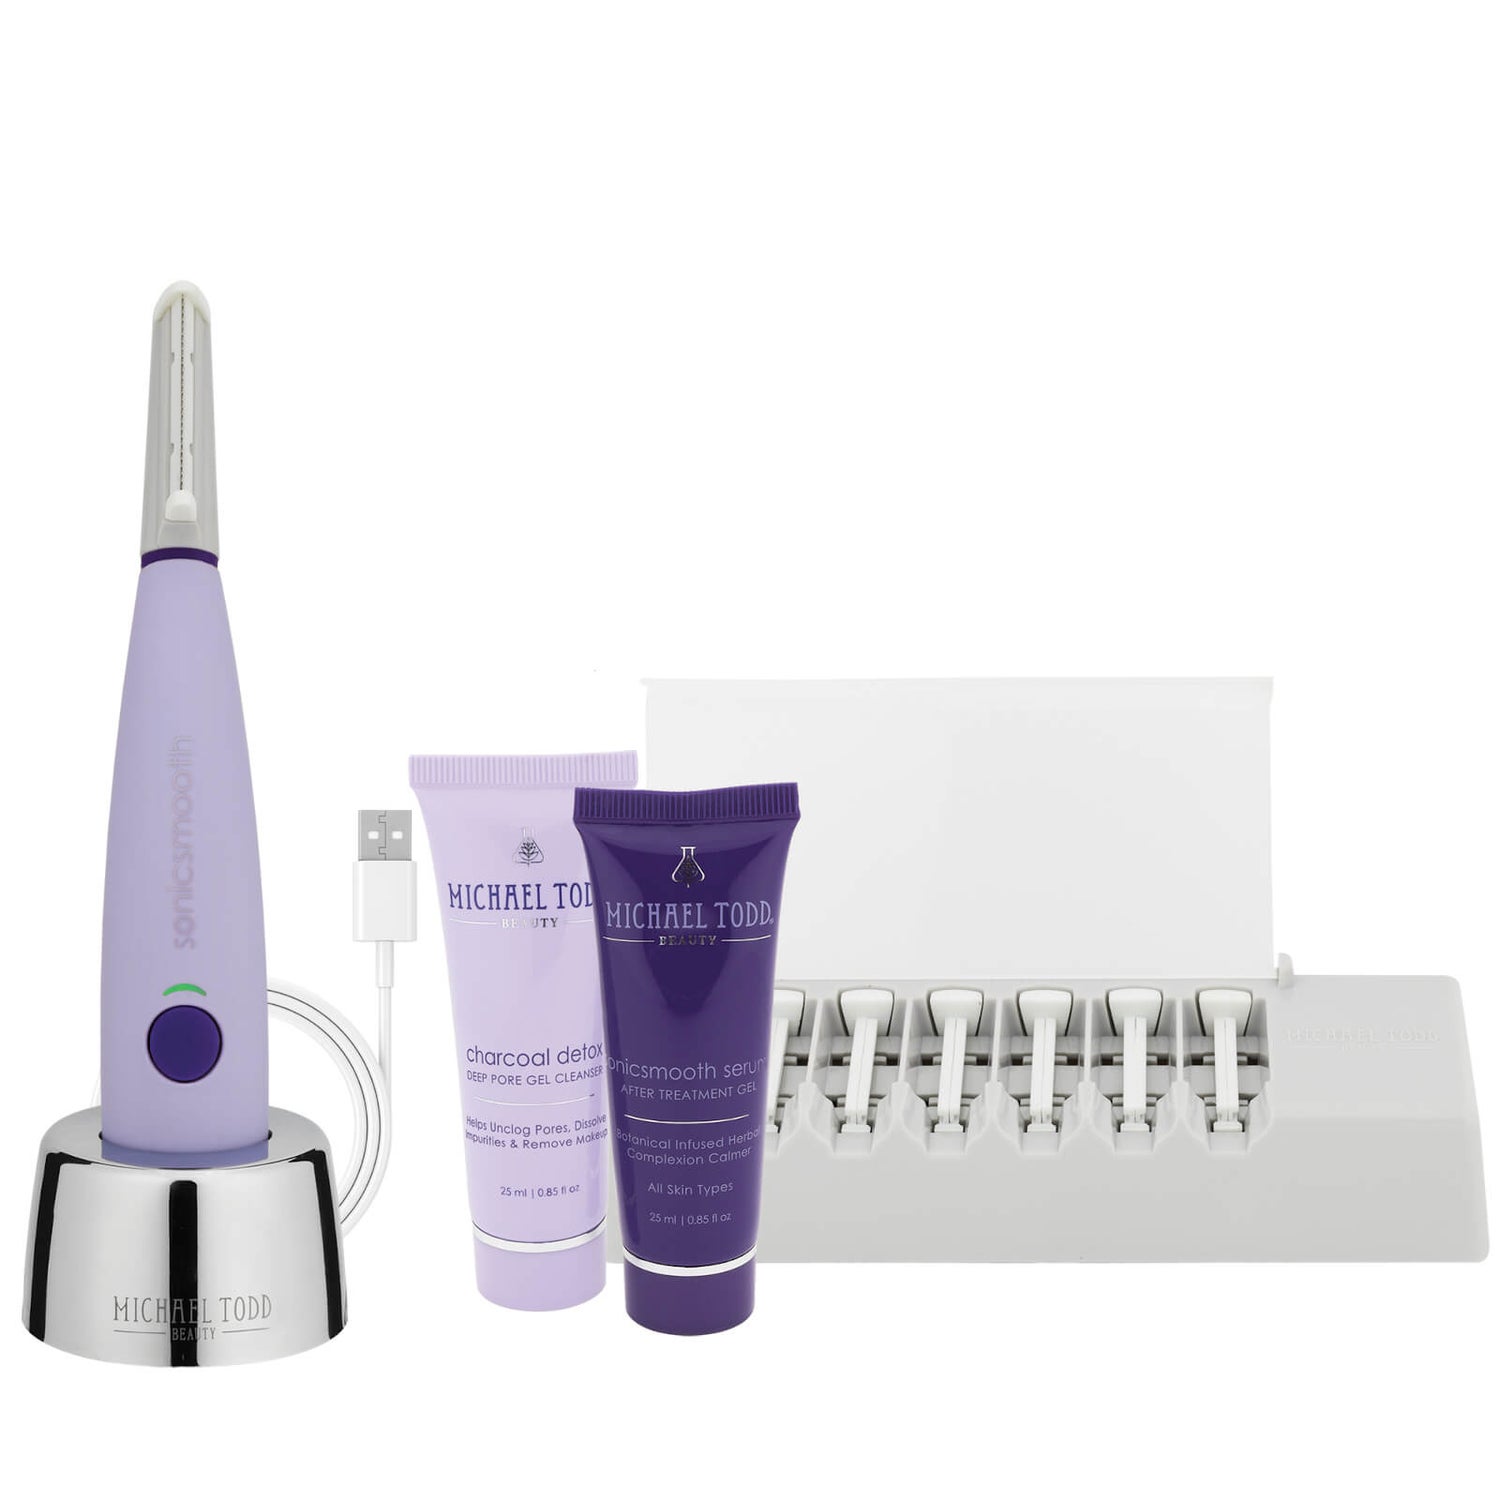 Michael Todd Beauty Sonicsmooth Sonic Dermaplaning and Exfoliation System (Various Shades)